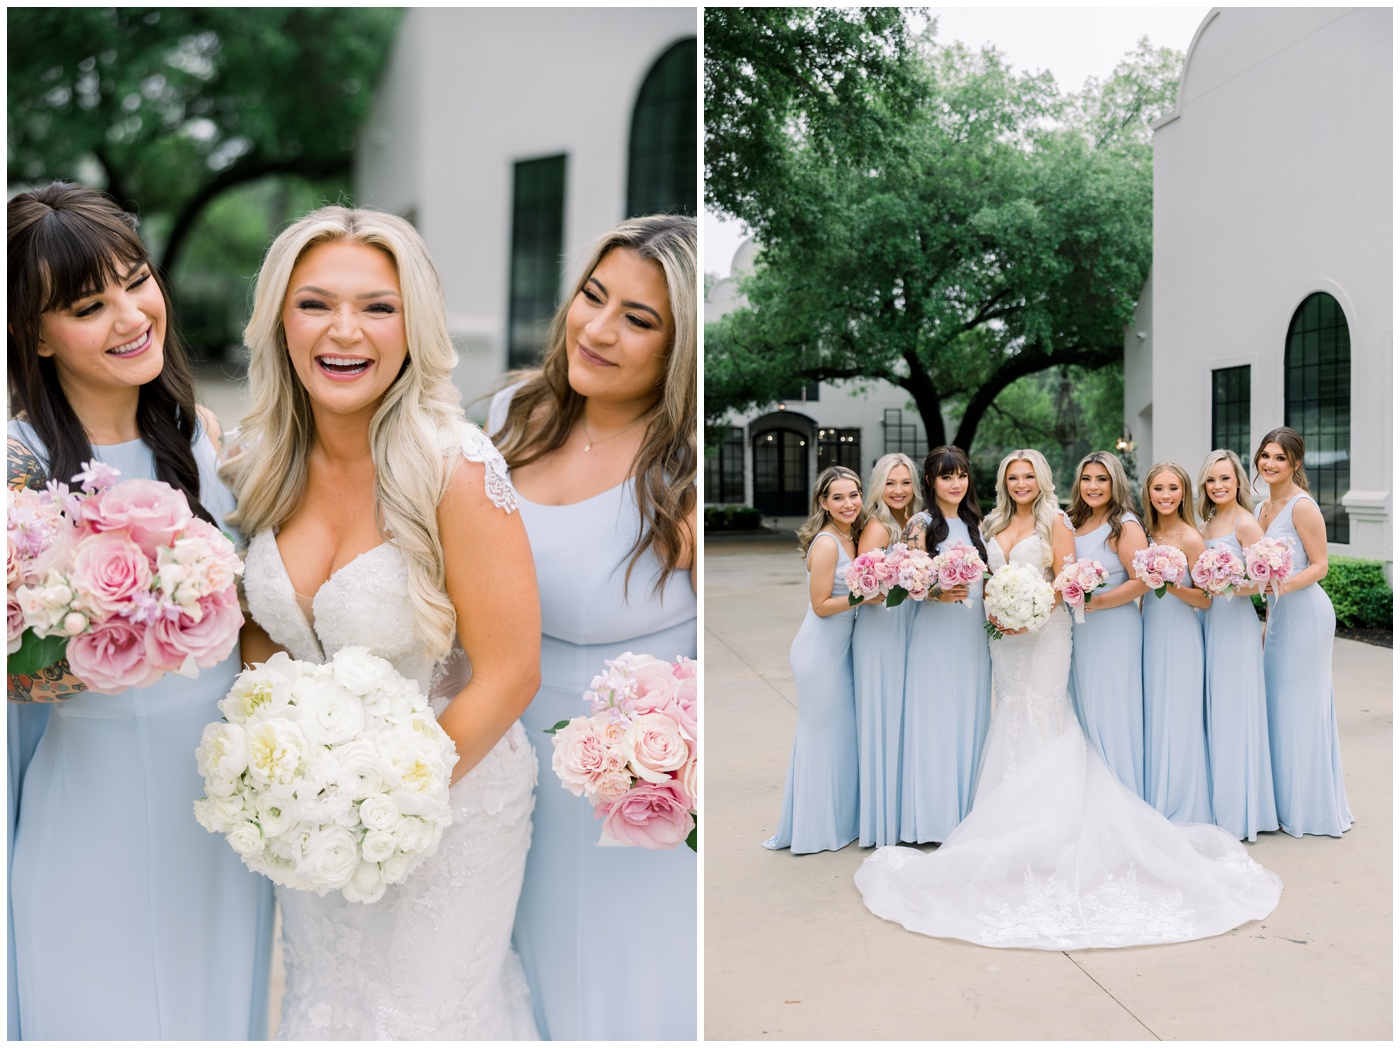 A bride with her bridesmaids on her wedding day